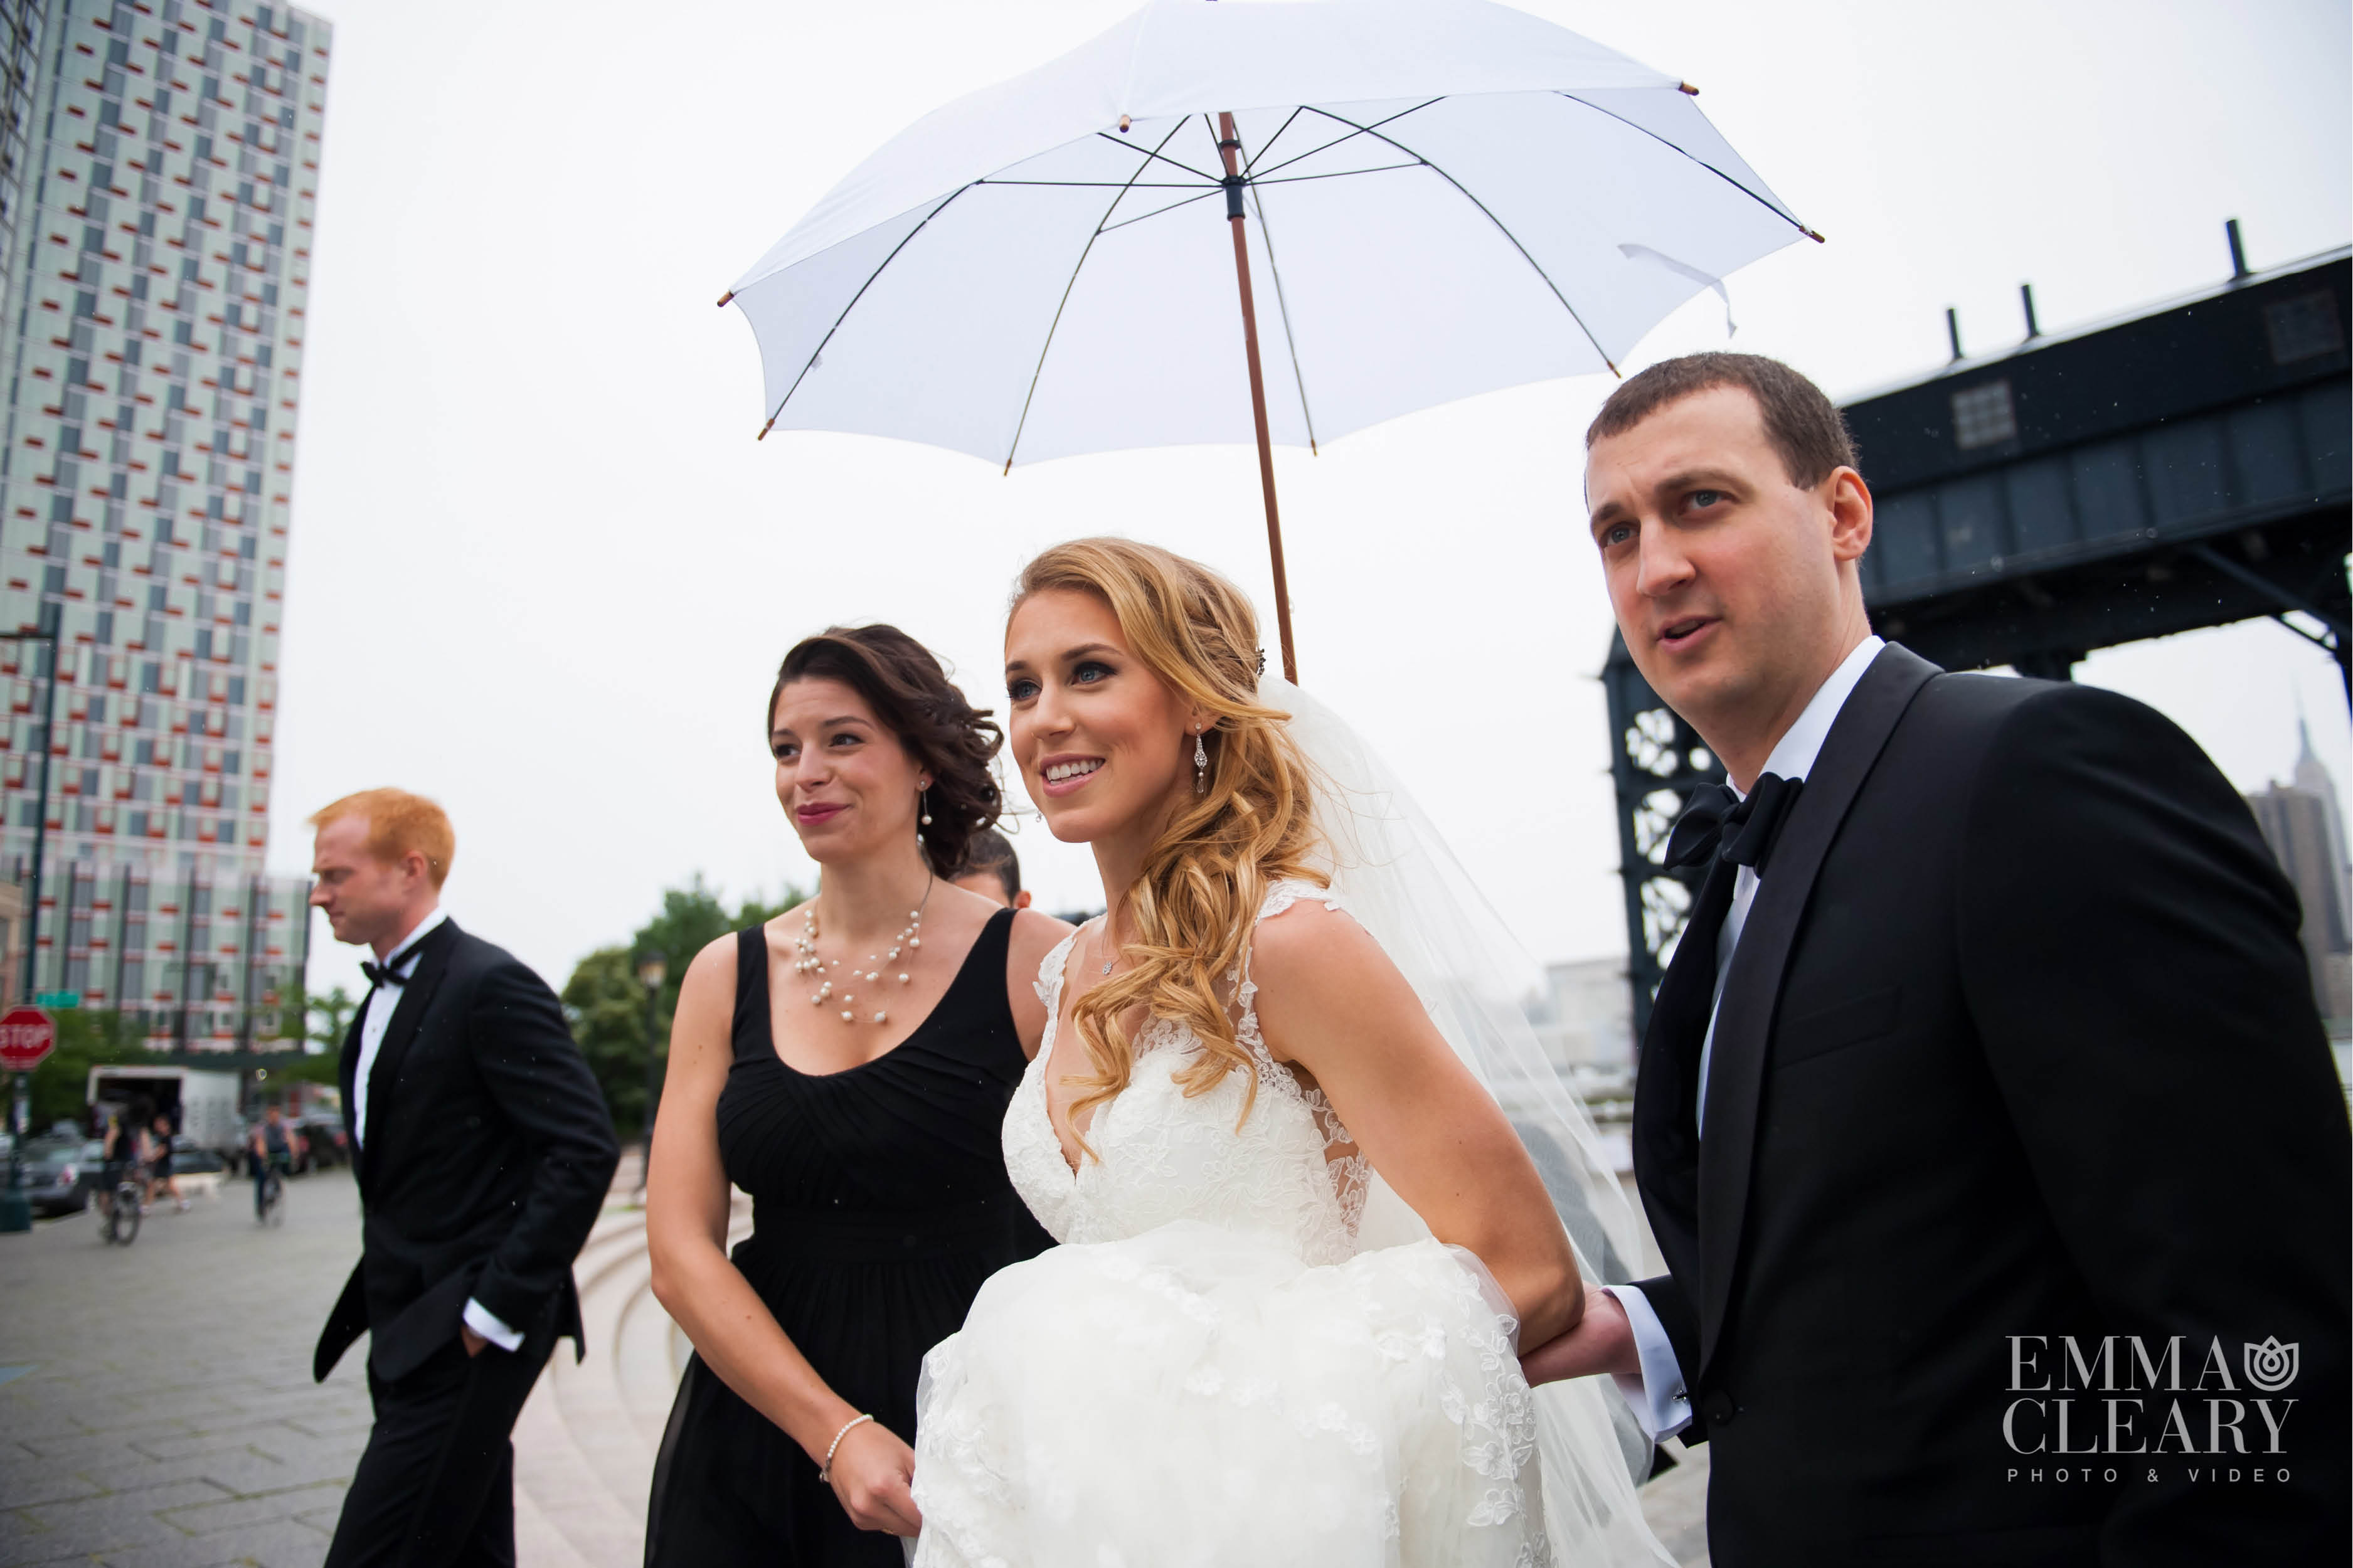 Emma_cleary_photography the Metropolitan Building wedding13